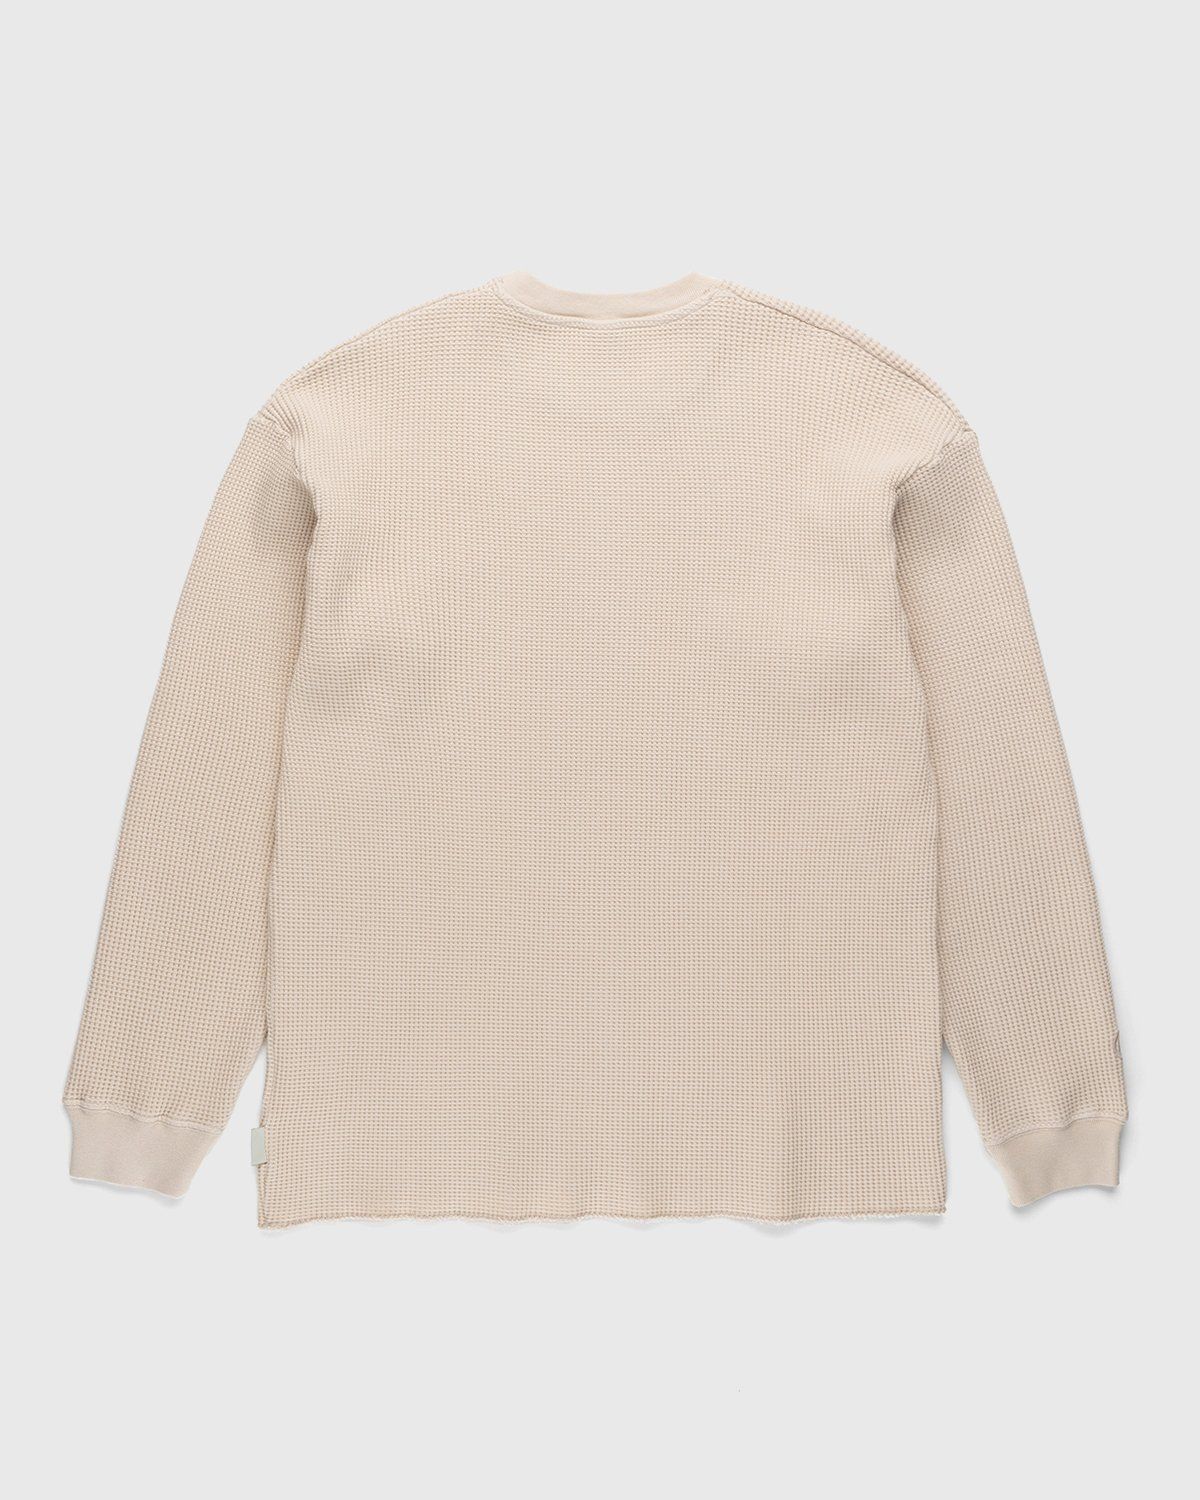 Highsnobiety – Thermal Staples Long Sleeve Off White - Sweats - Beige - Image 2